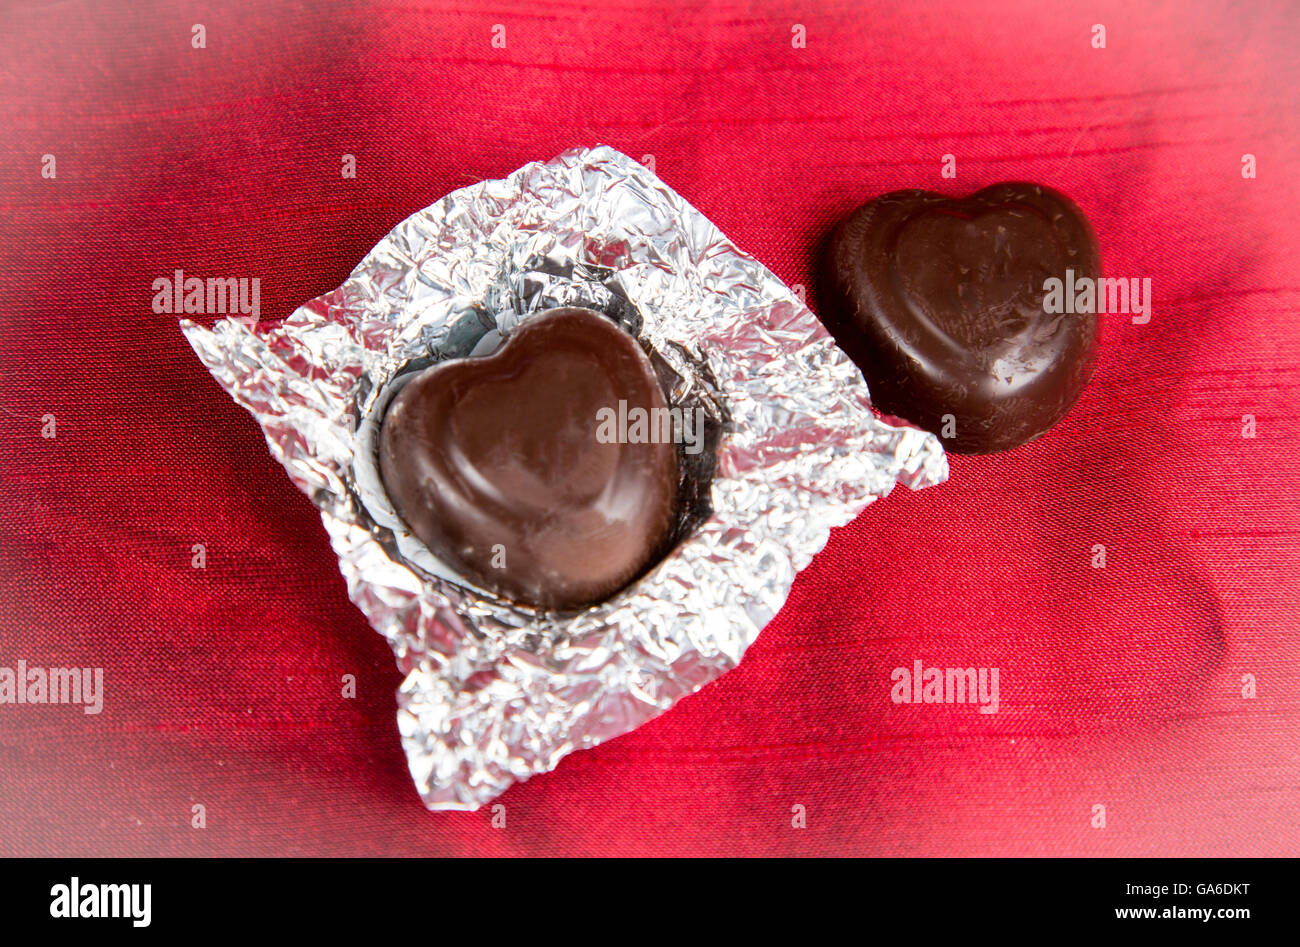 Heart shaped valentine's day chocolate candies on a red background. Stock Photo